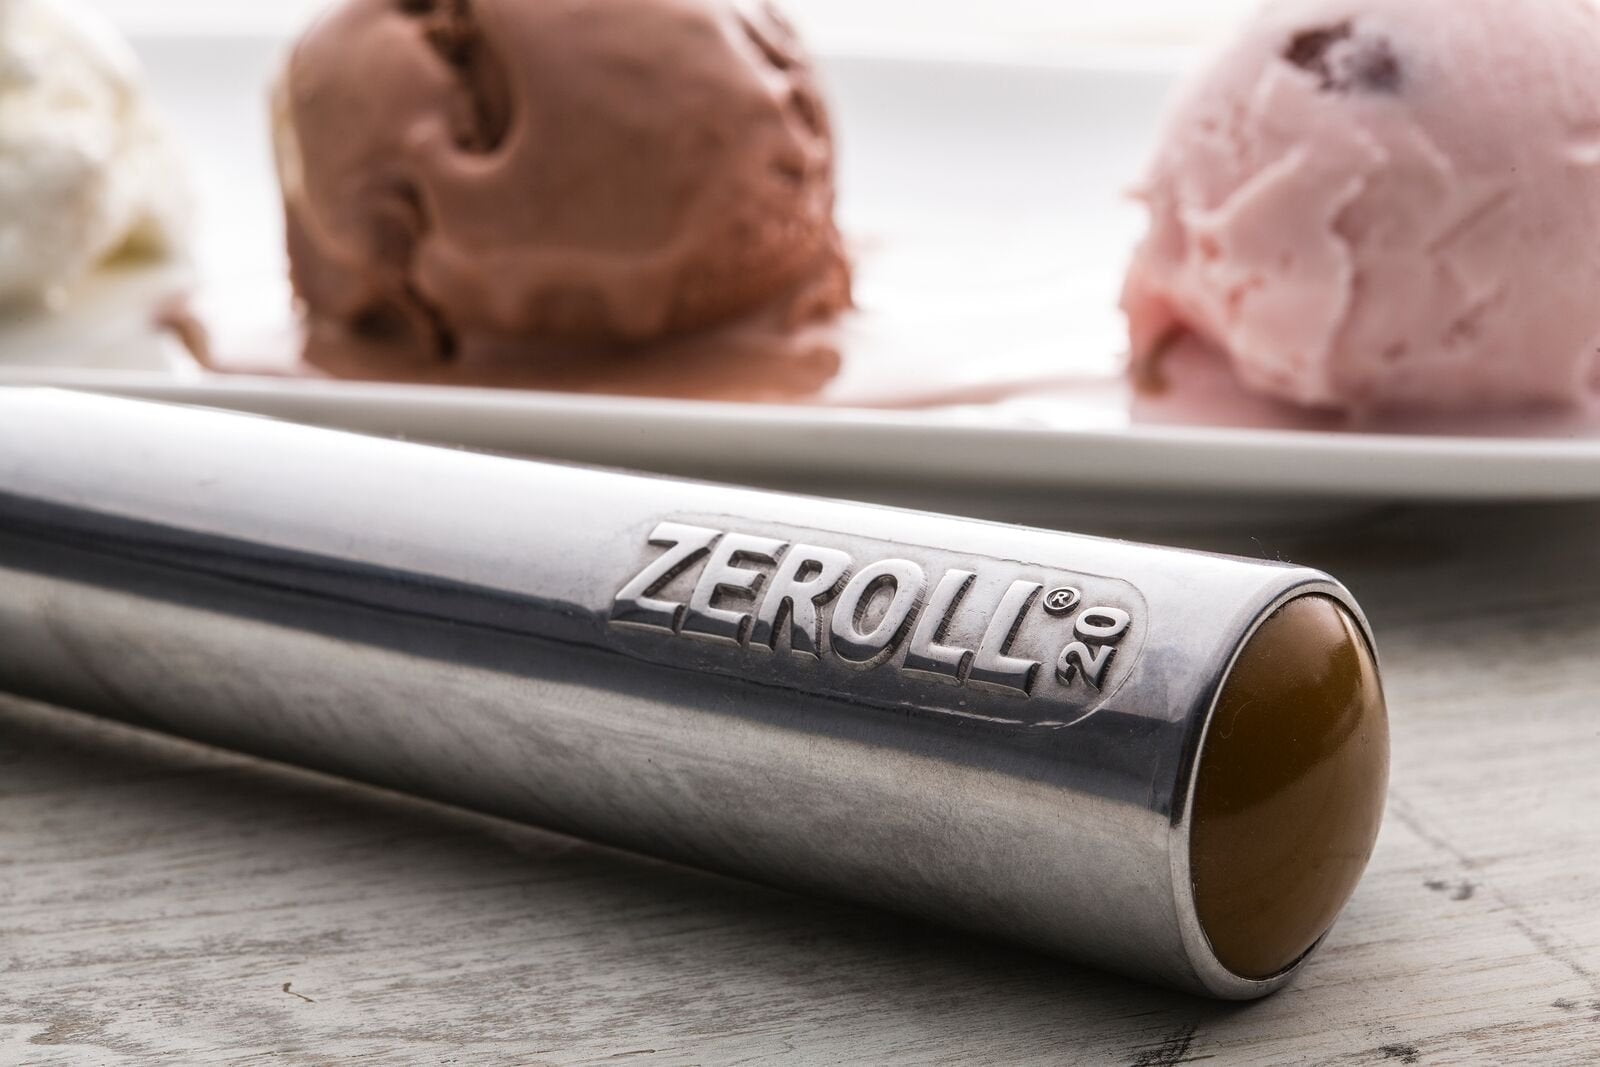 Zeroll Original Ice Cream Scoop with Heat-Conductive Handle — Tools and Toys